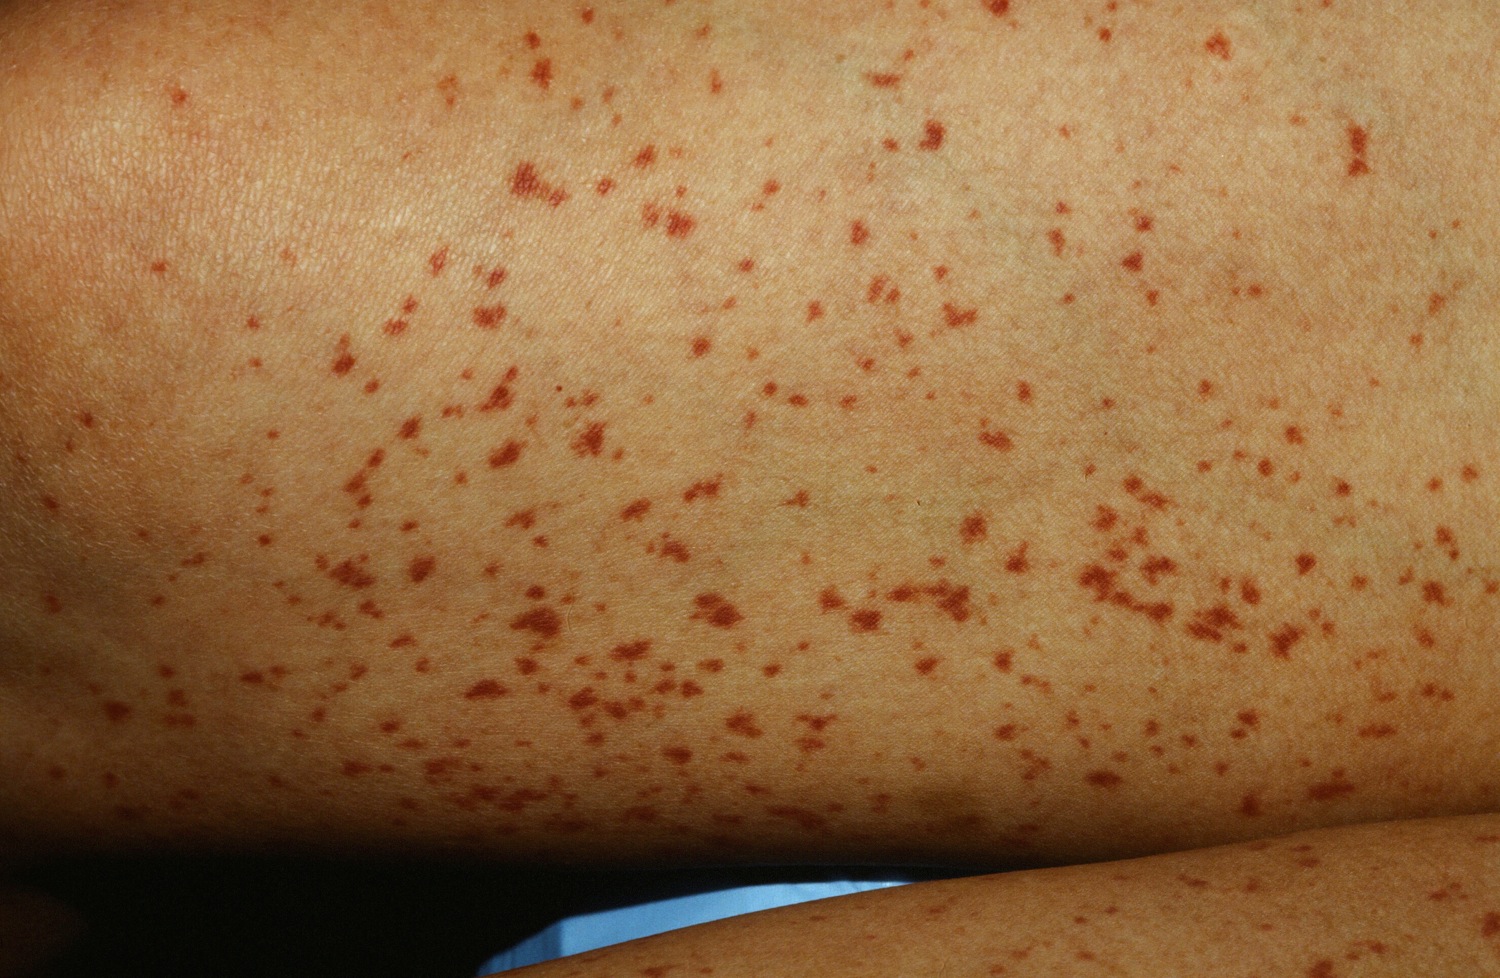 pinpoint red dots on skin a bunch